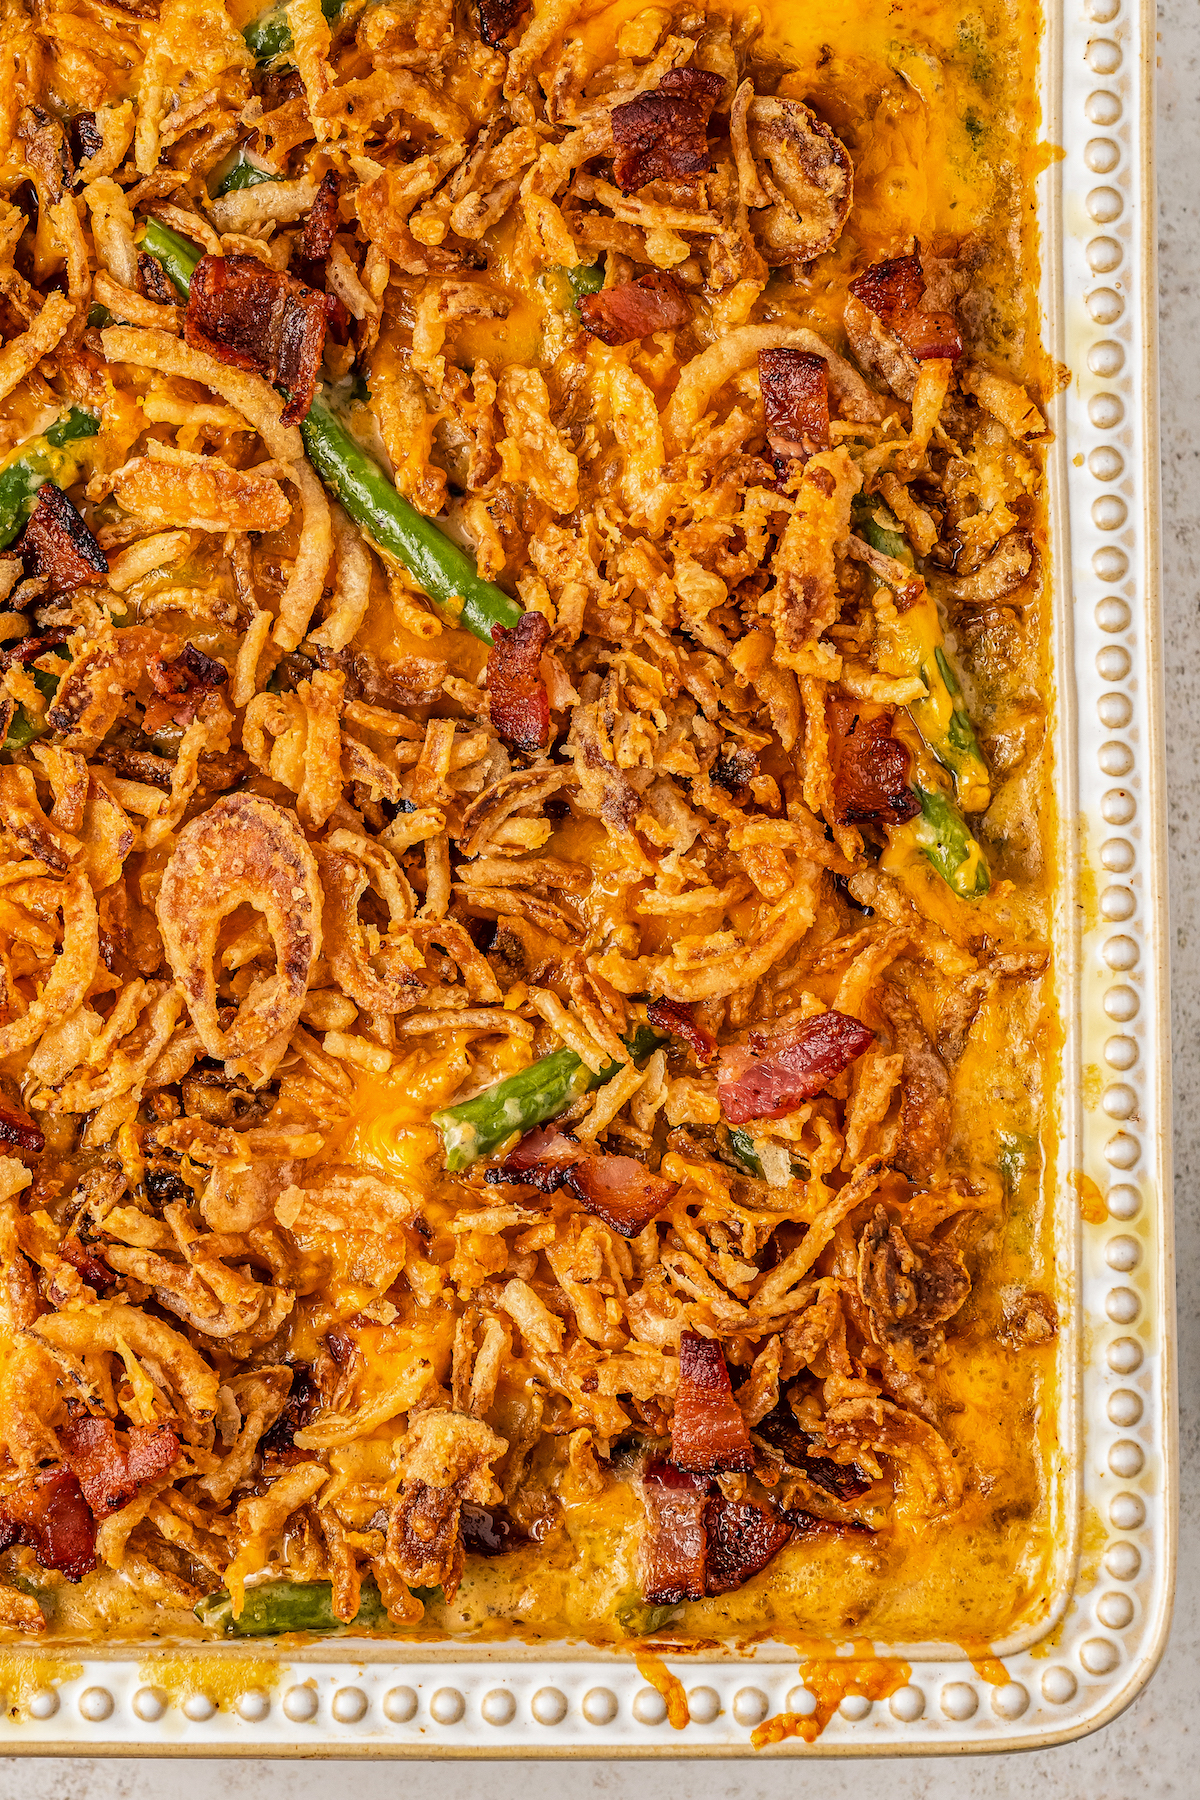 Close-up shot of a green bean casserole with cheese, bacon and crispy fried onions on top in a glass baking dish.